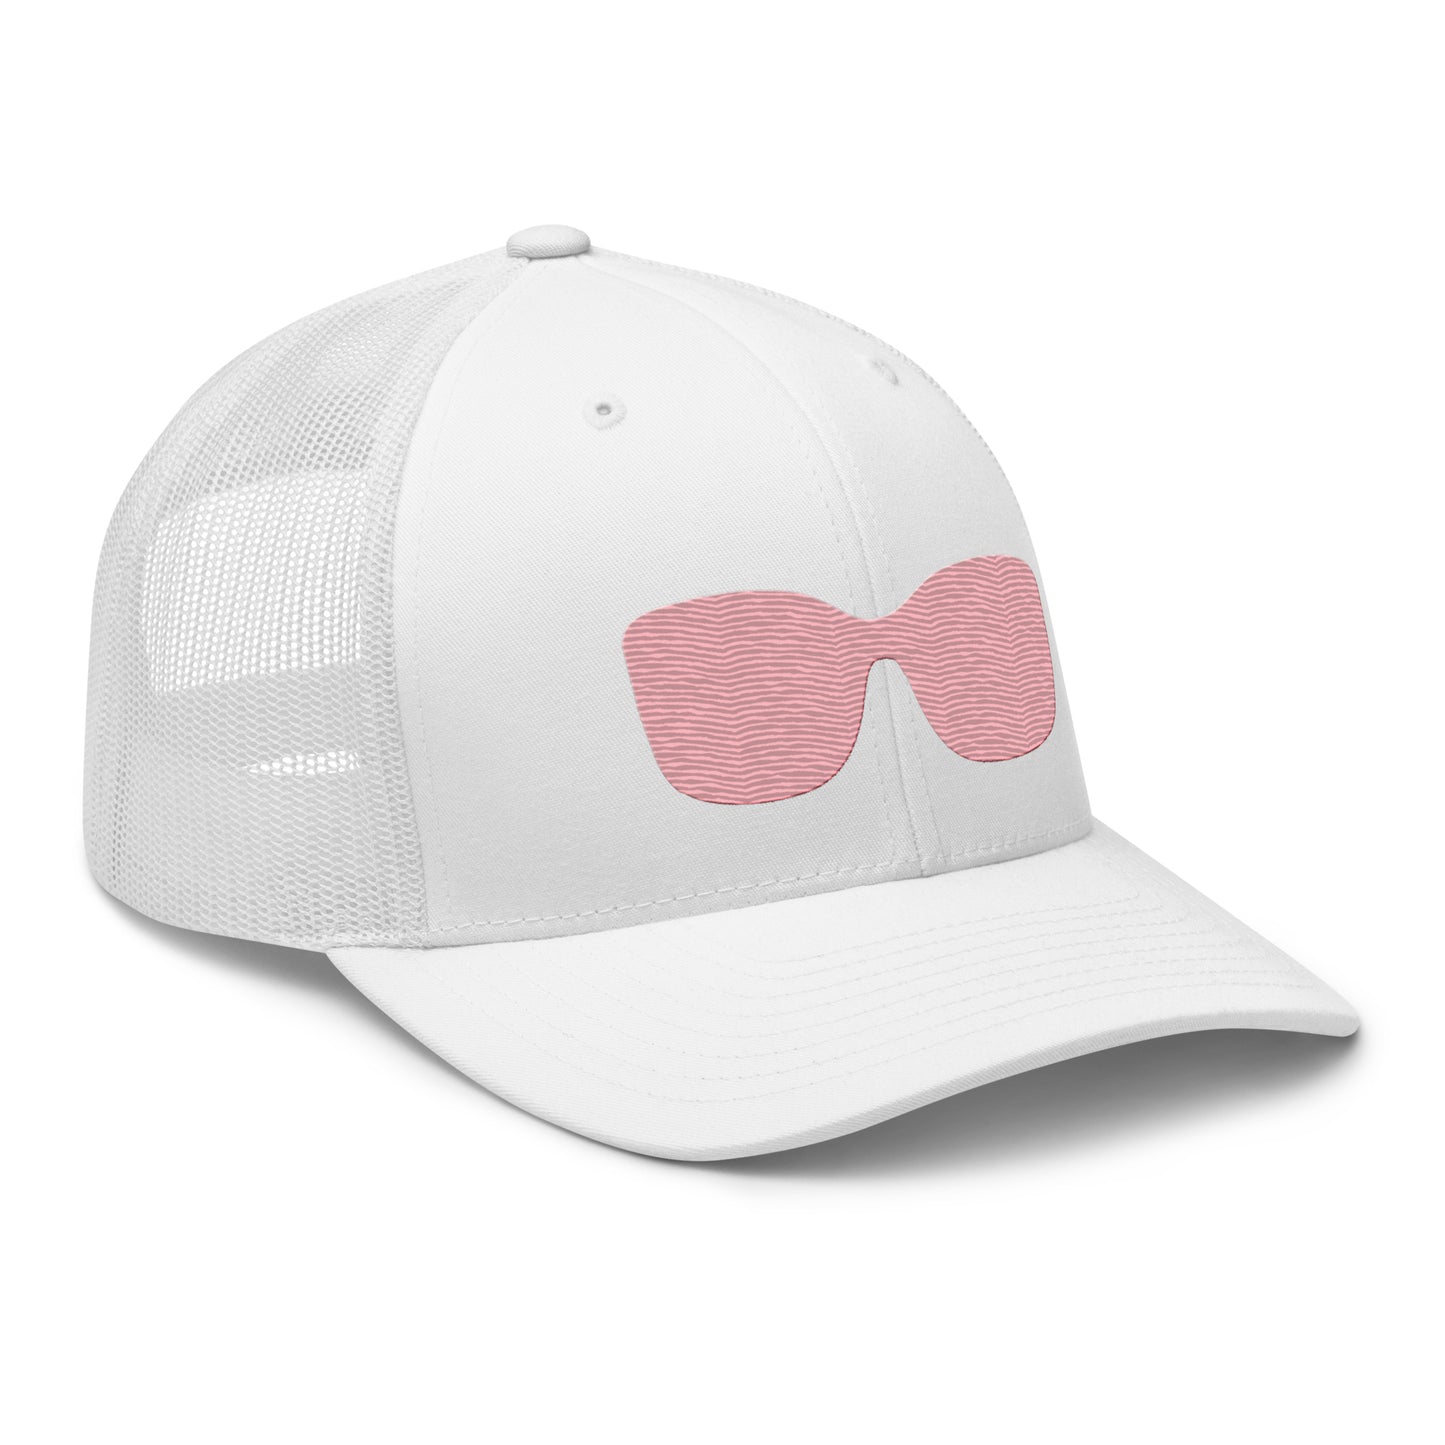 It's Giving Shades Trucker Cap - White/Pink